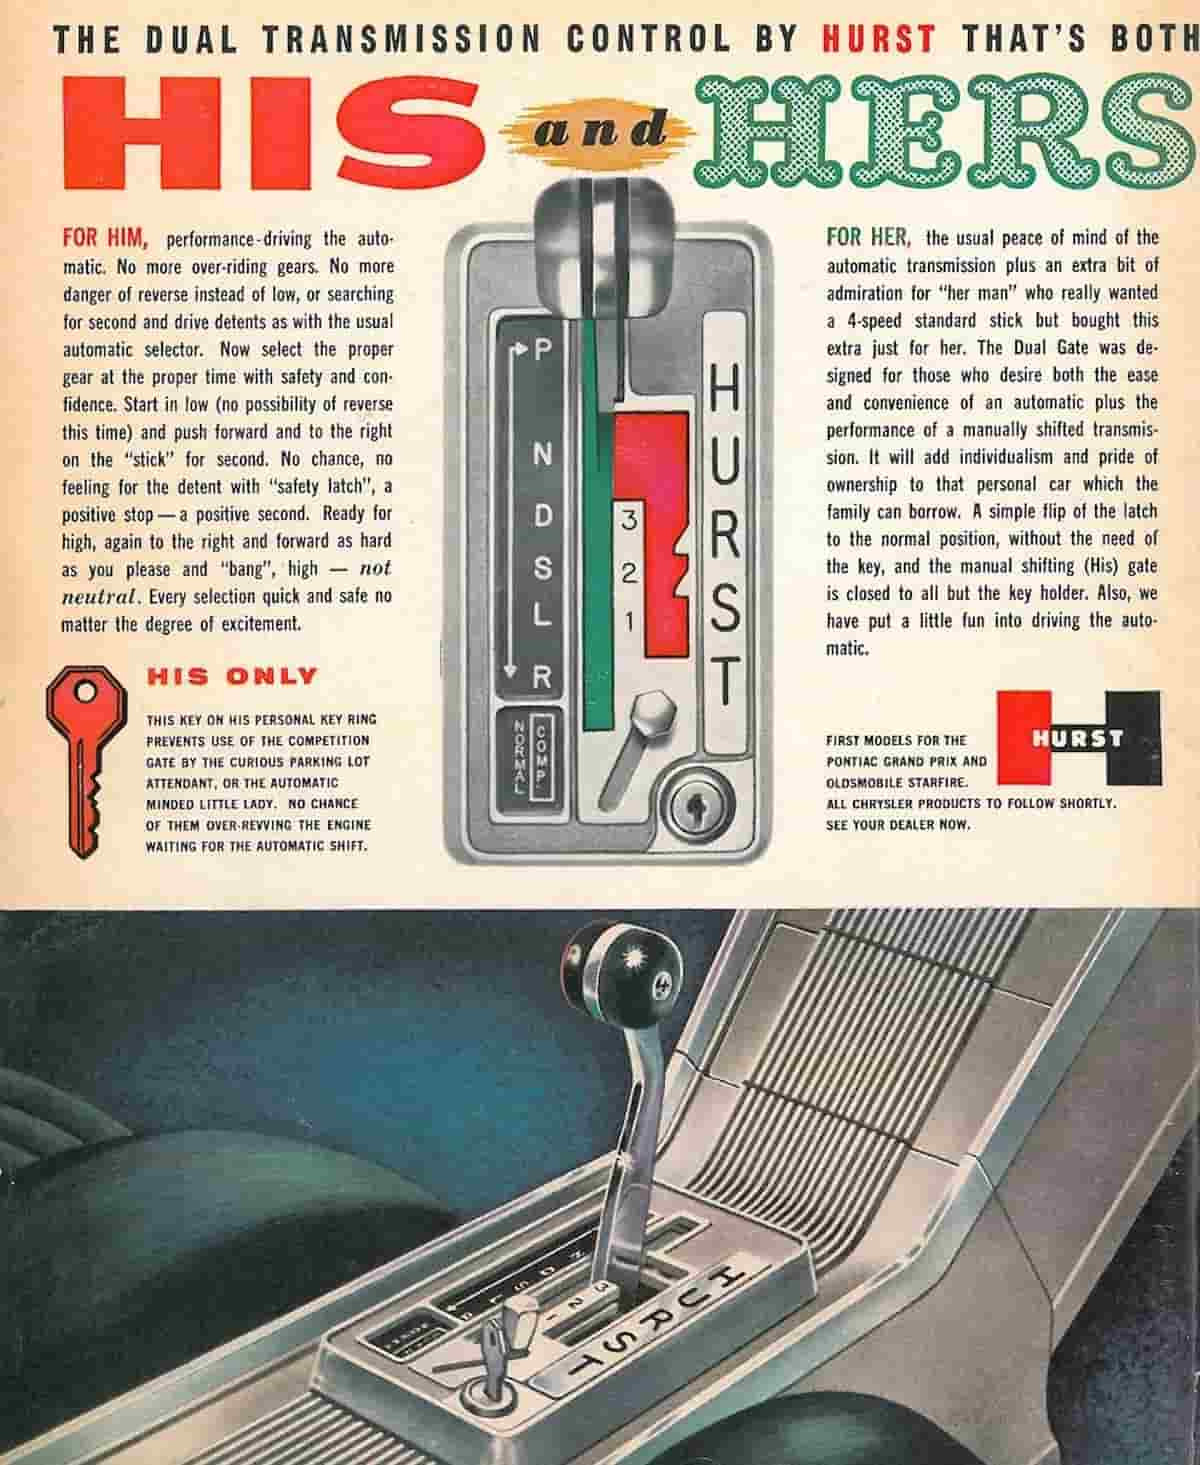 Hurst-His-and-Hers-dual-gate-shifter-min.jpg